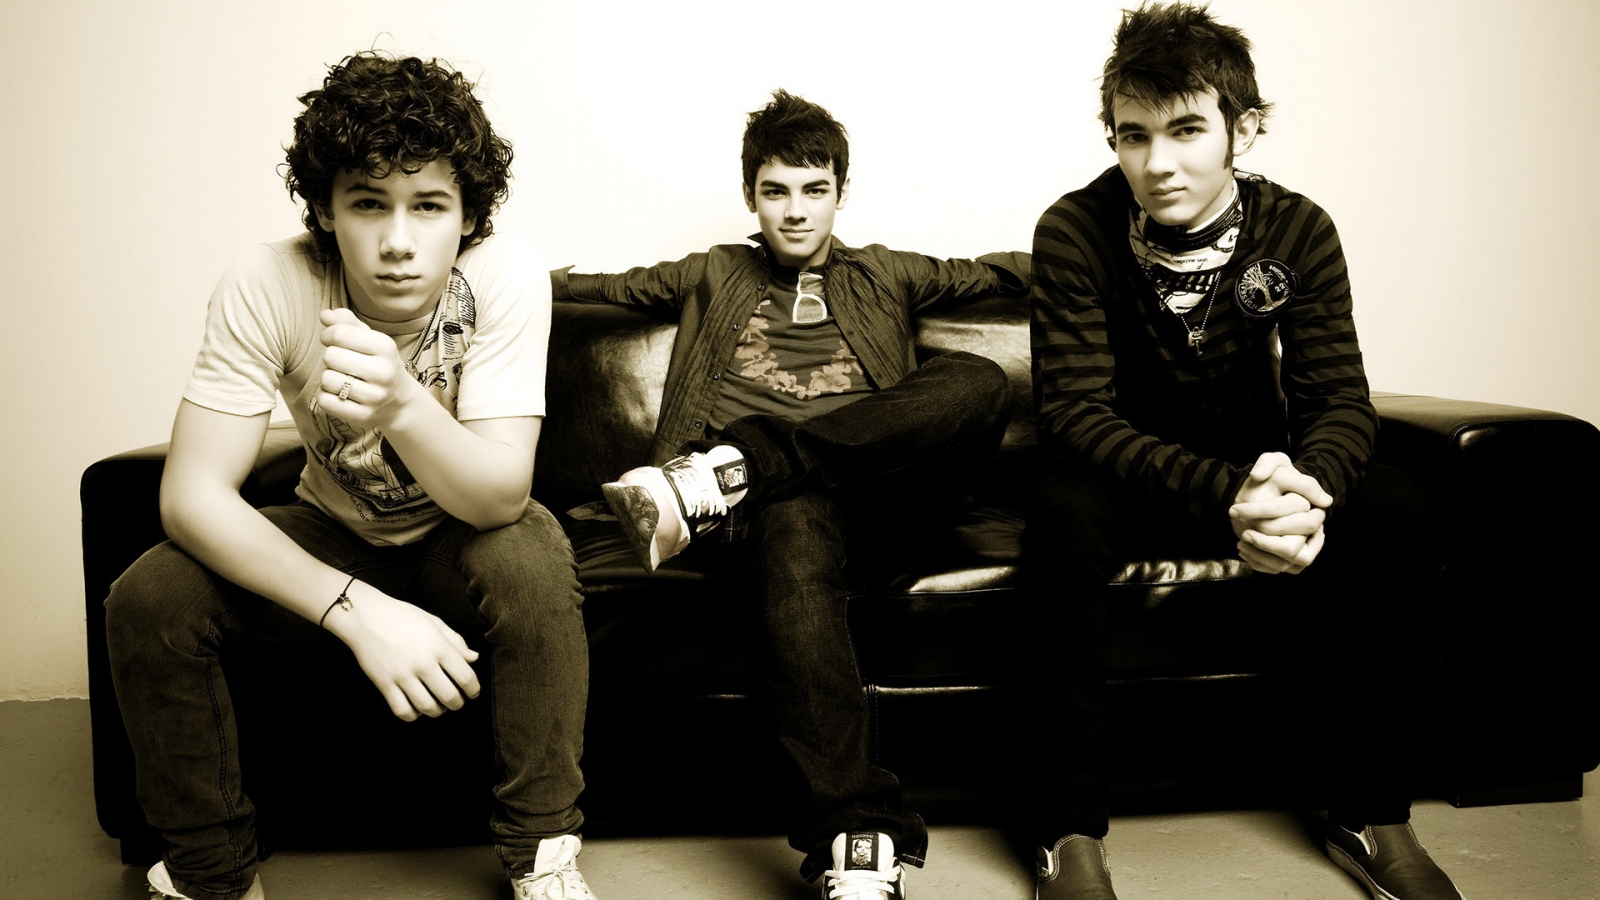 Jonas Brothers Recording Artists for 1600 x 900 HDTV resolution